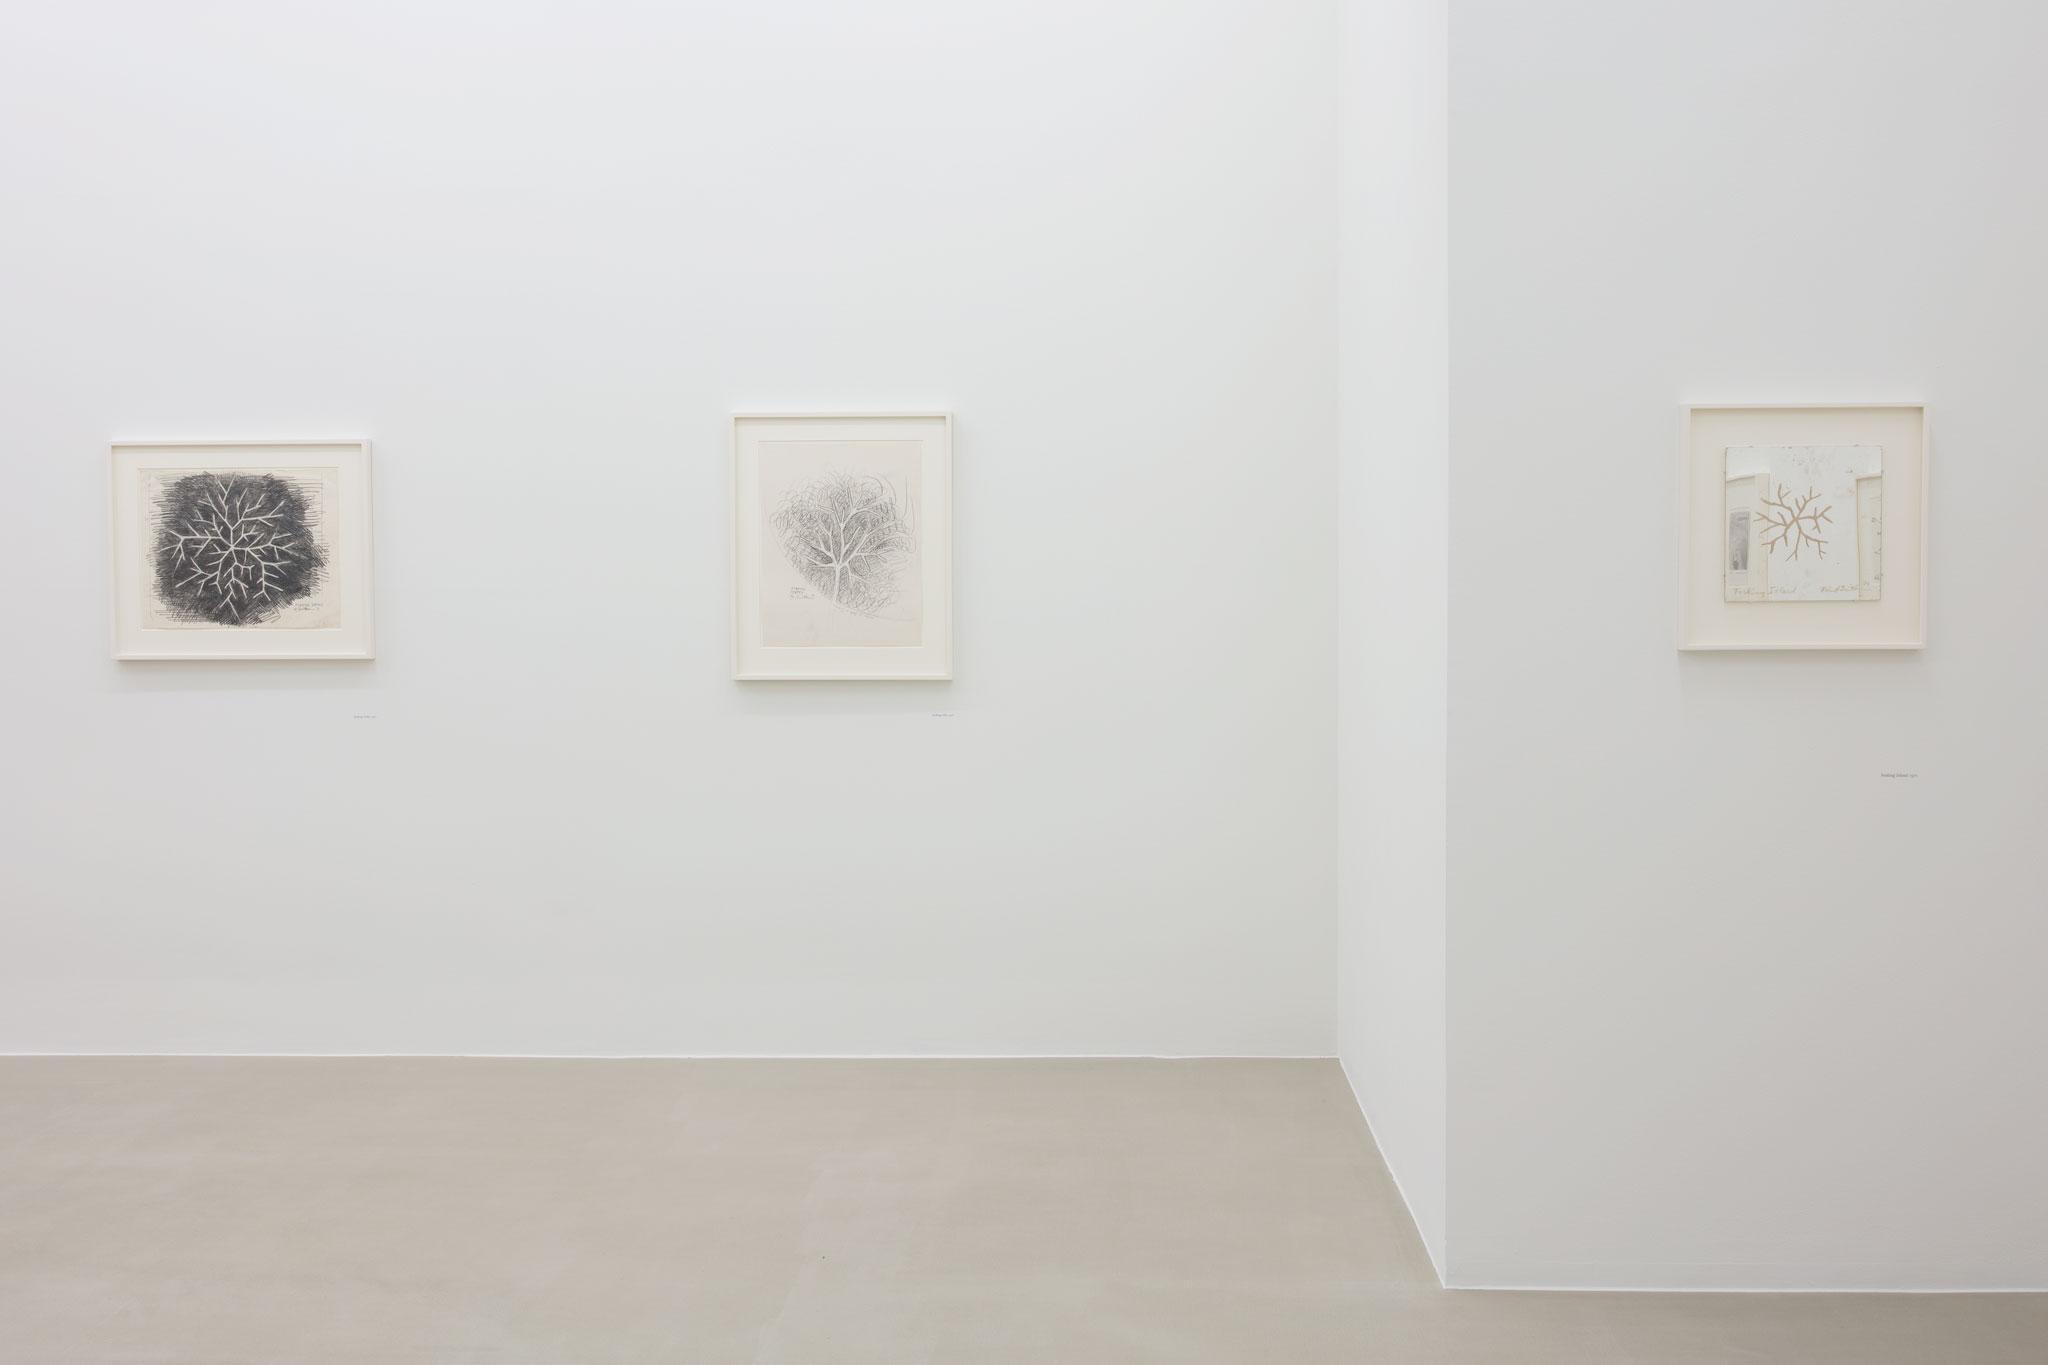 three black and white artworks hanging on the white walls of an art gallery